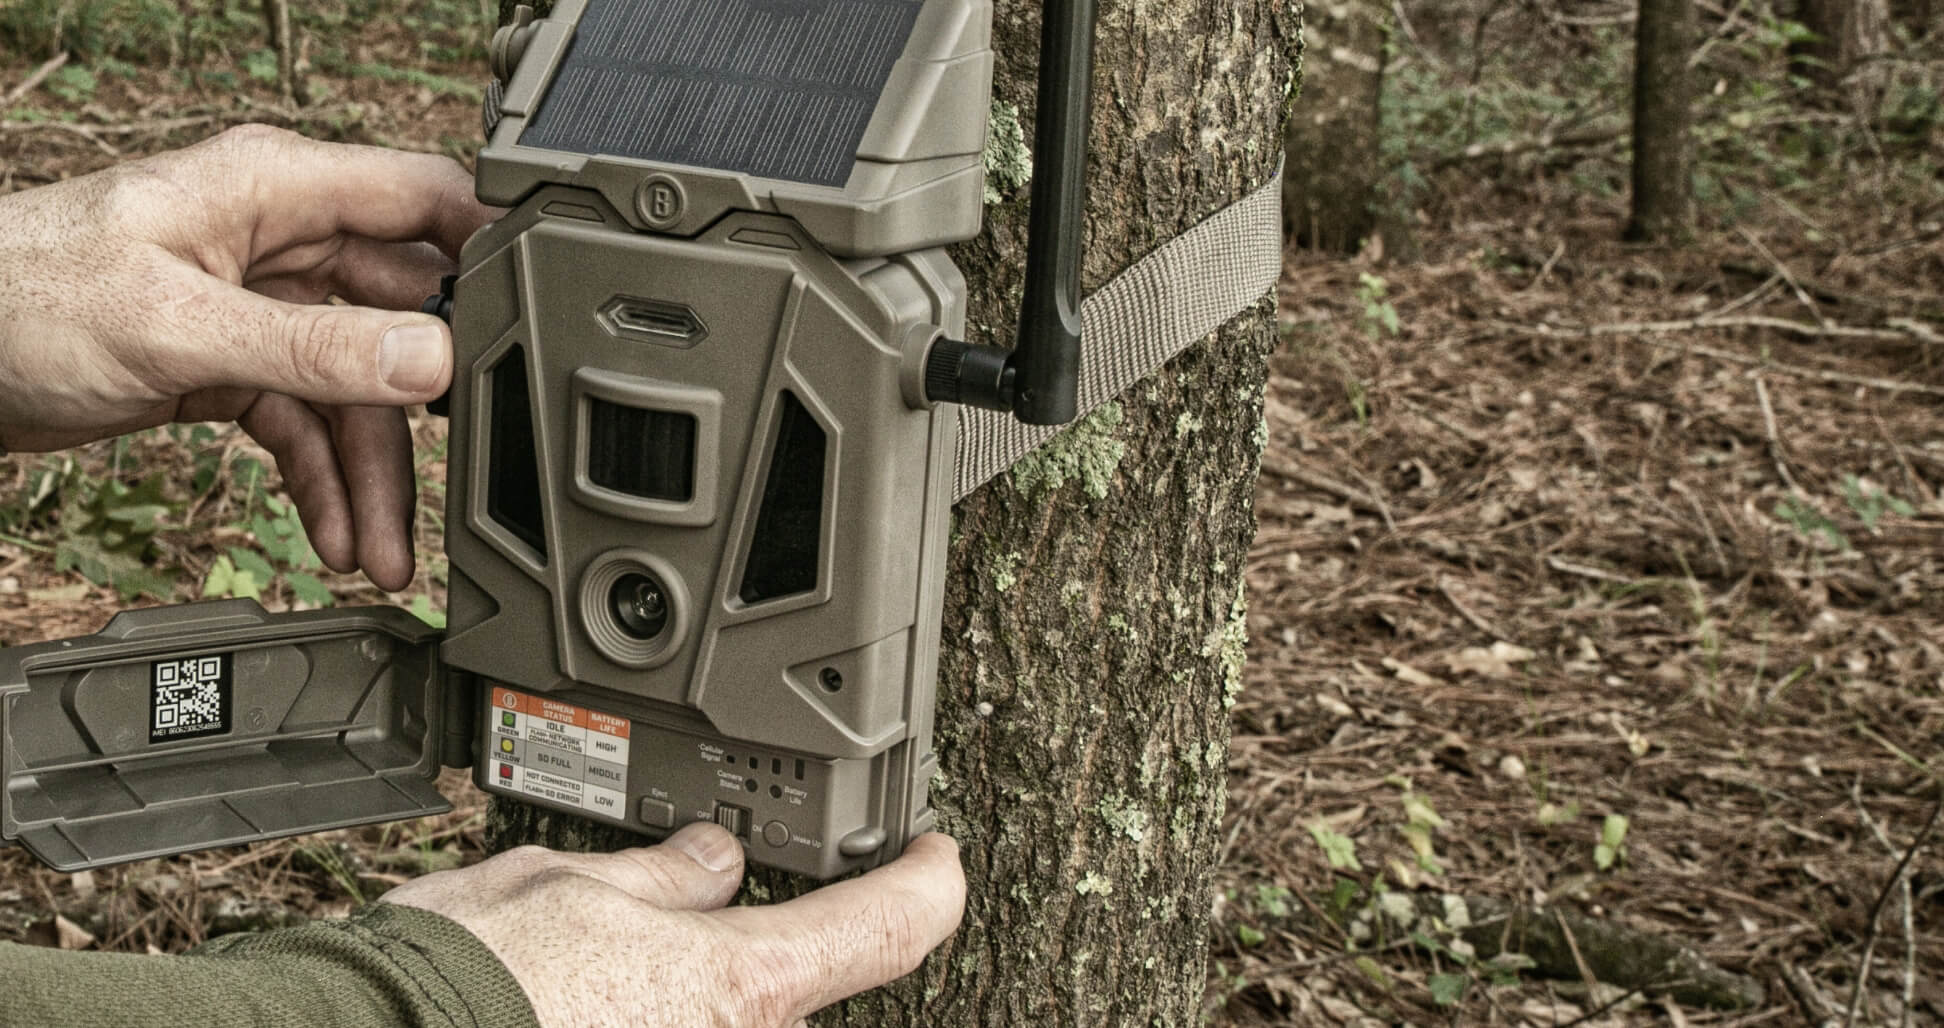 Bushnell Trail Camera Strapped to a Tree.